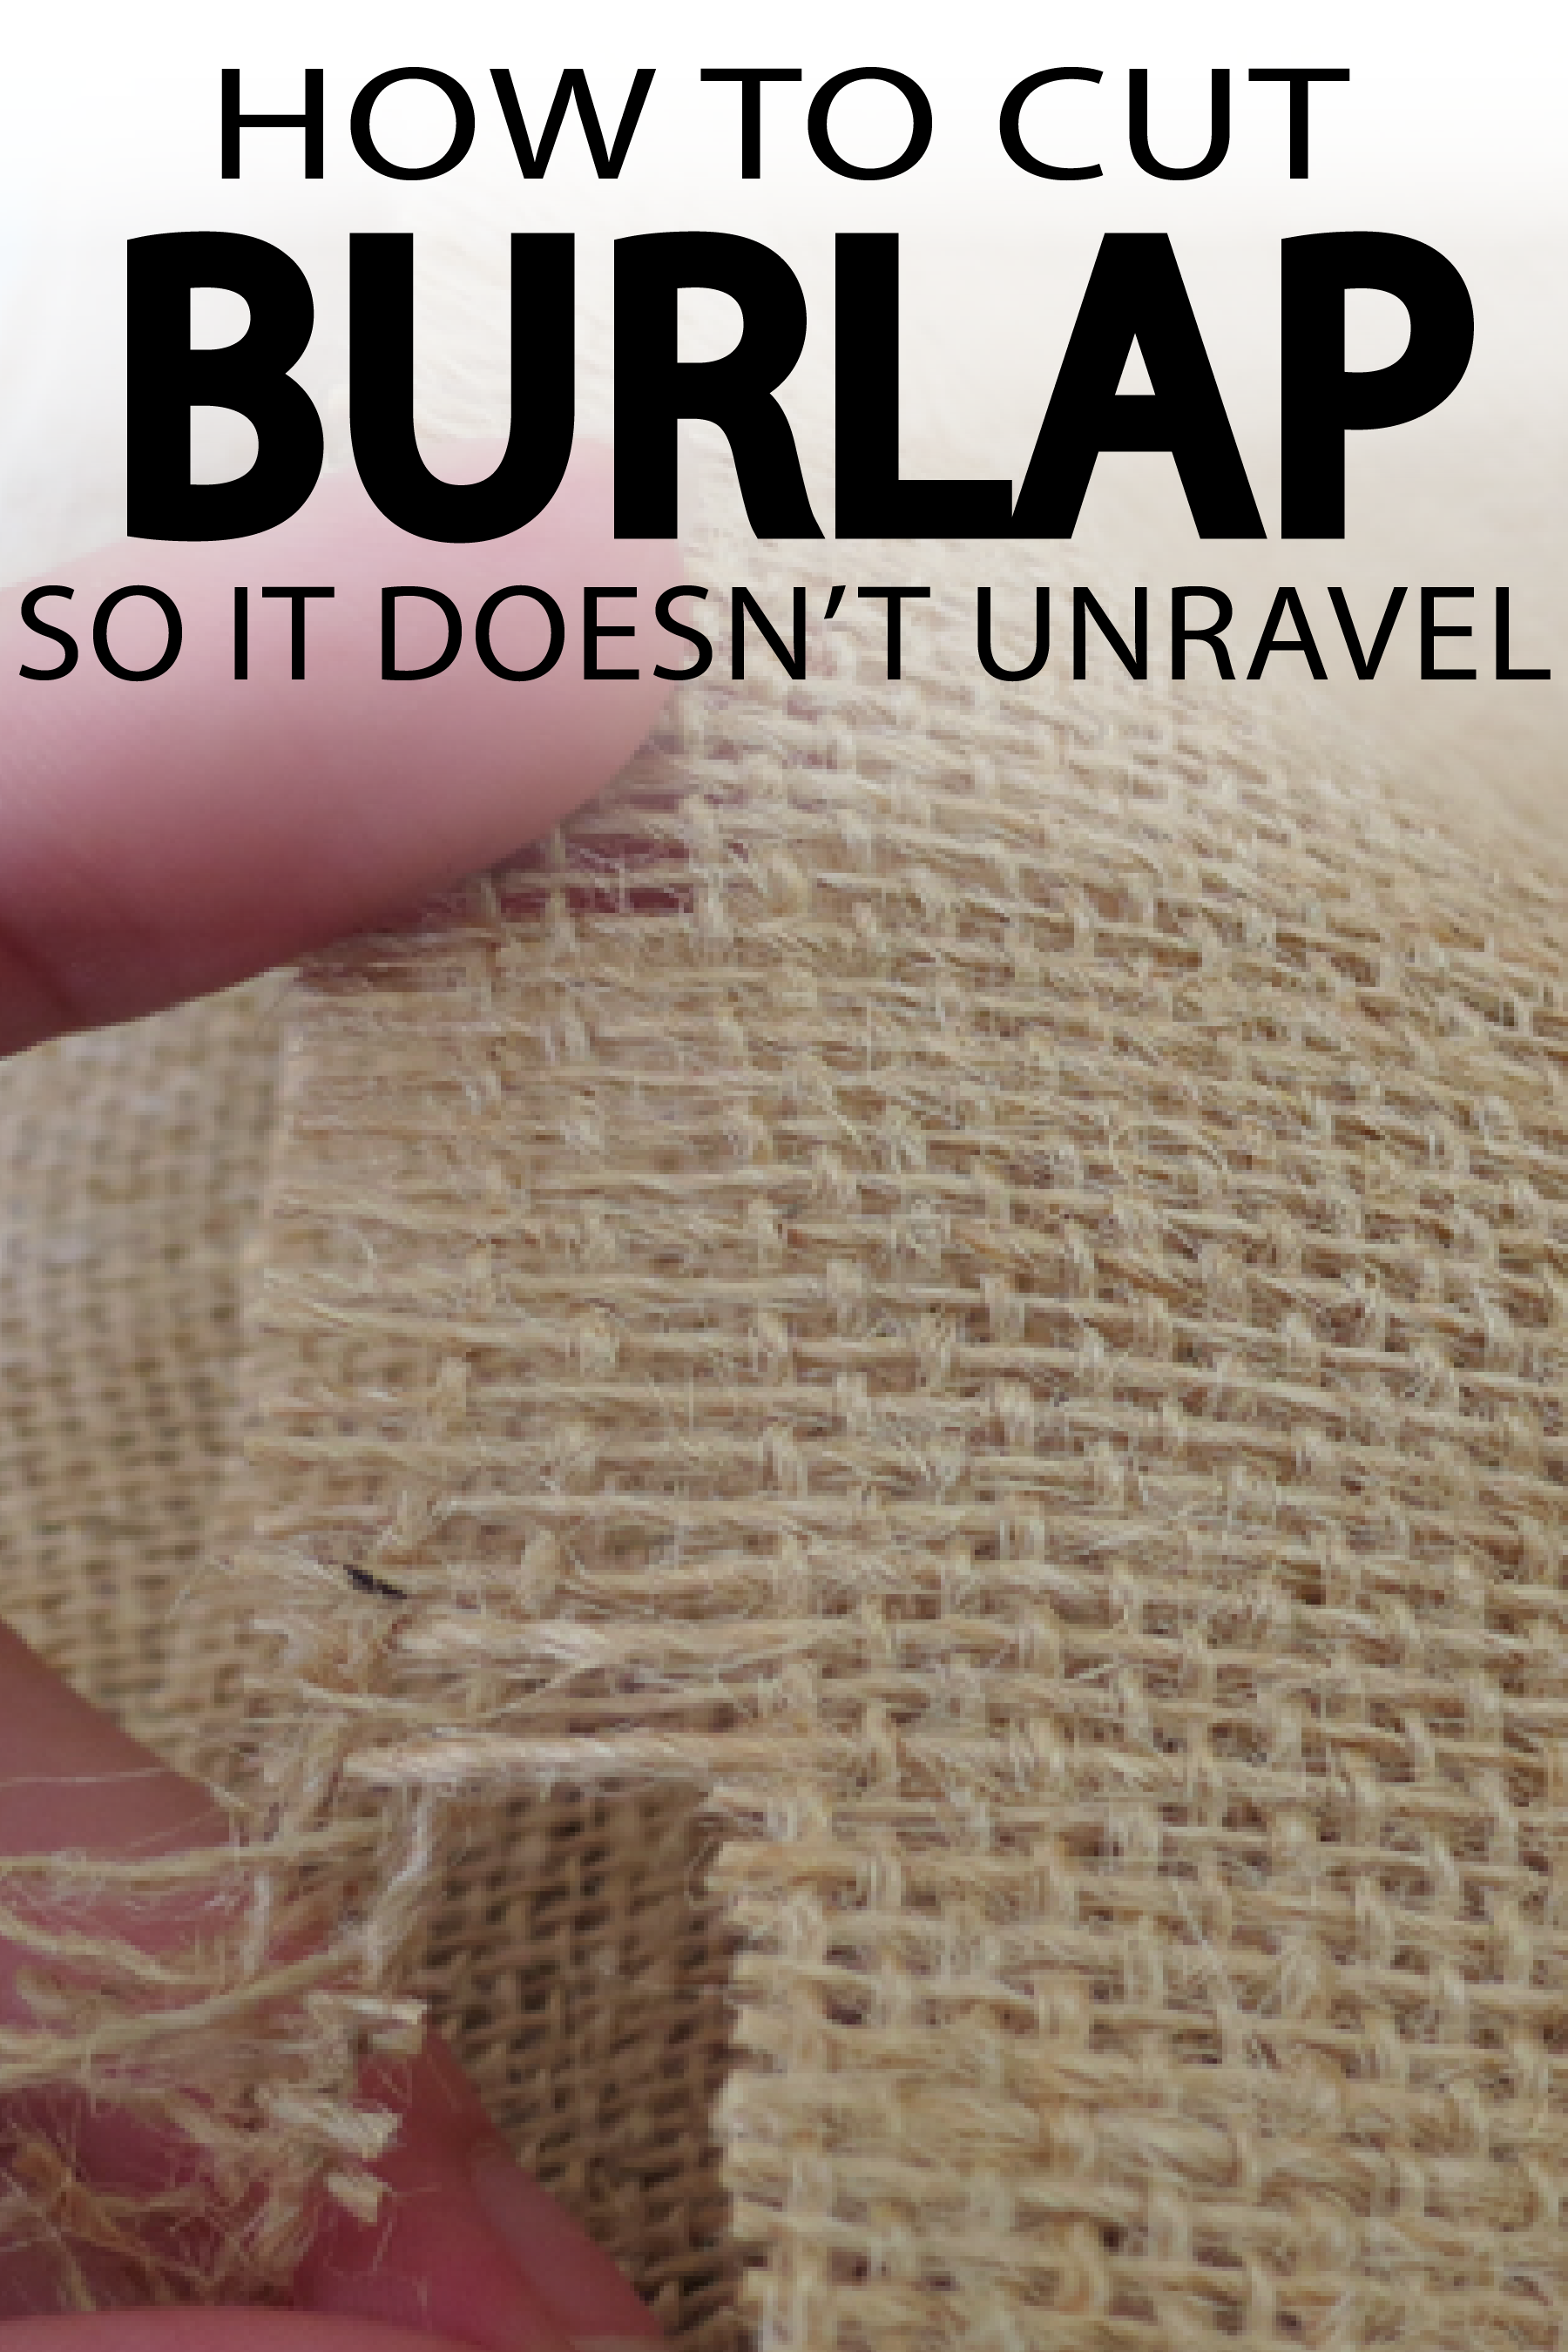 Learn how to cut burlap correctly so it doesn't unravel over time!